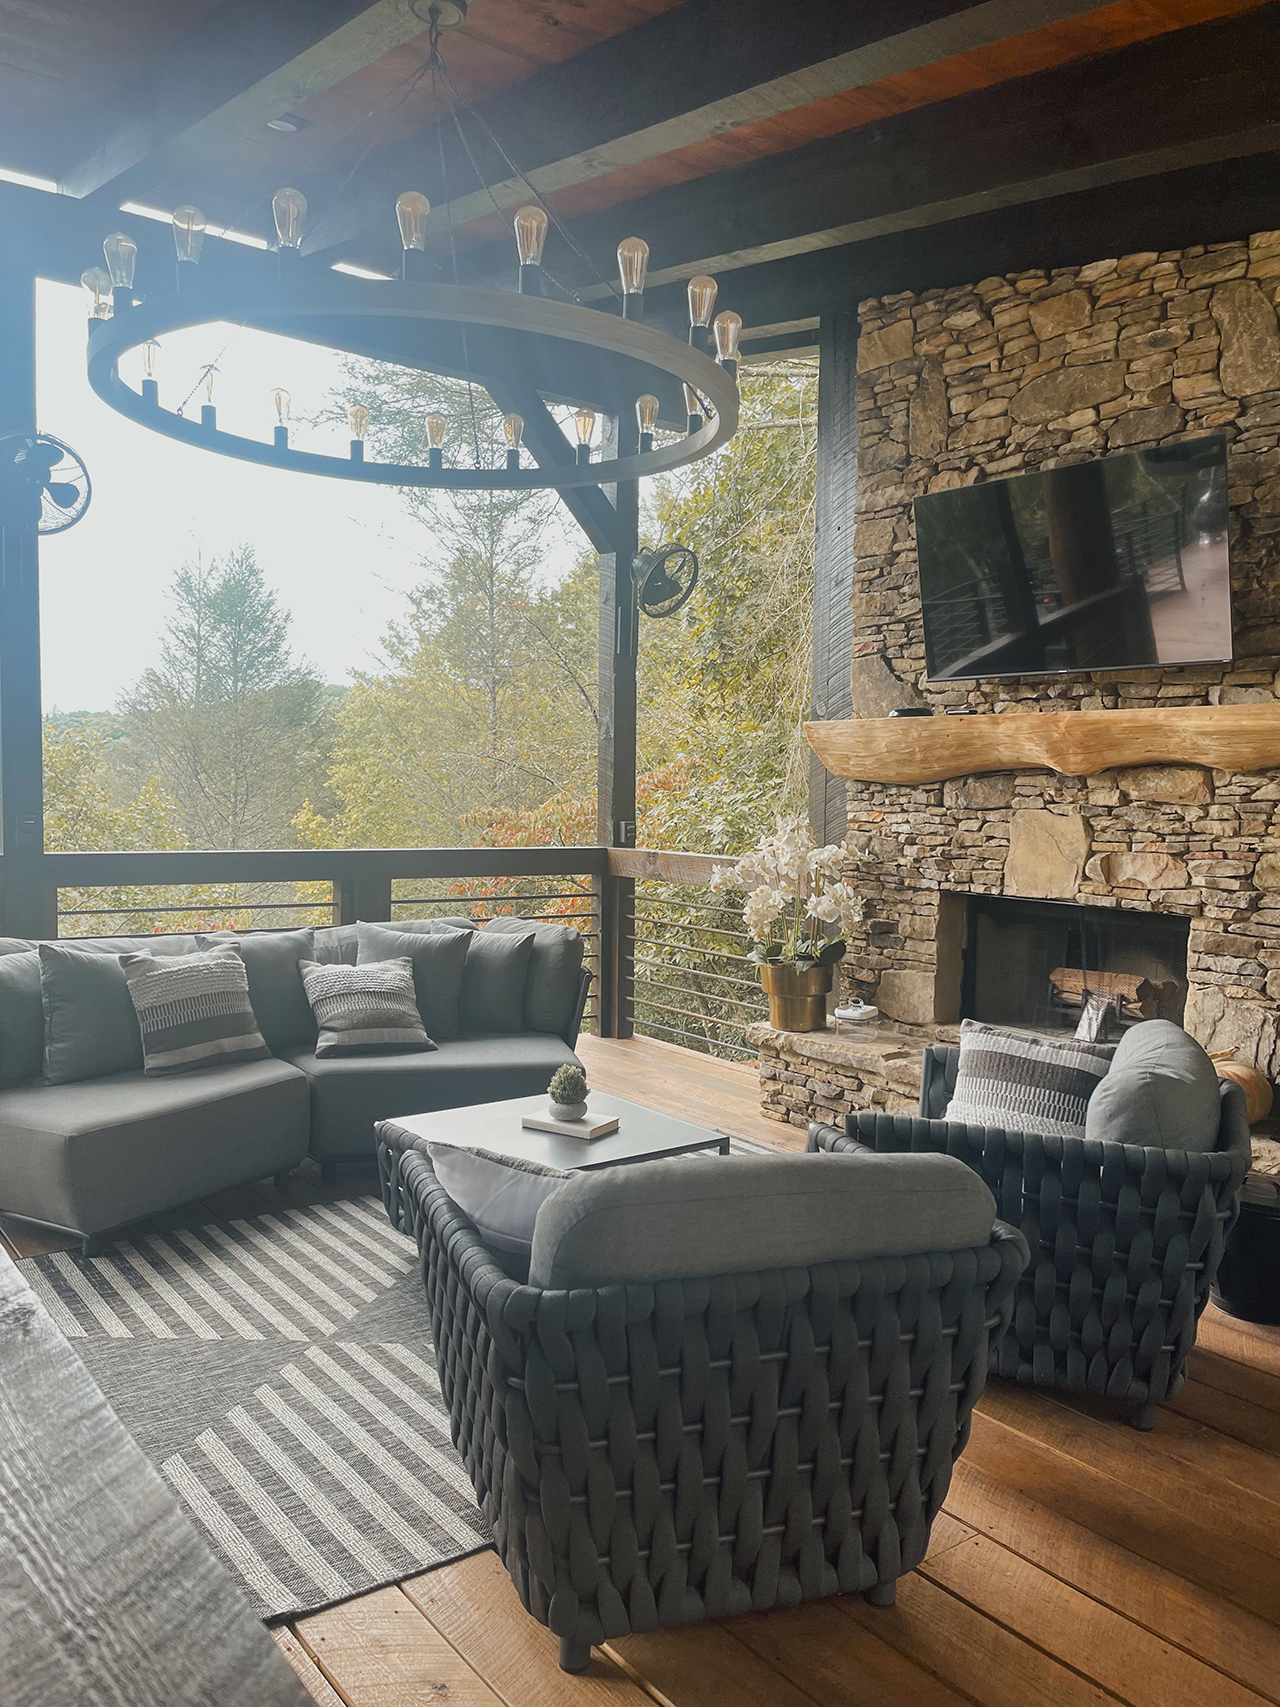 Interior Inspiration from the Blue Ridge Mountains Parade of Homes